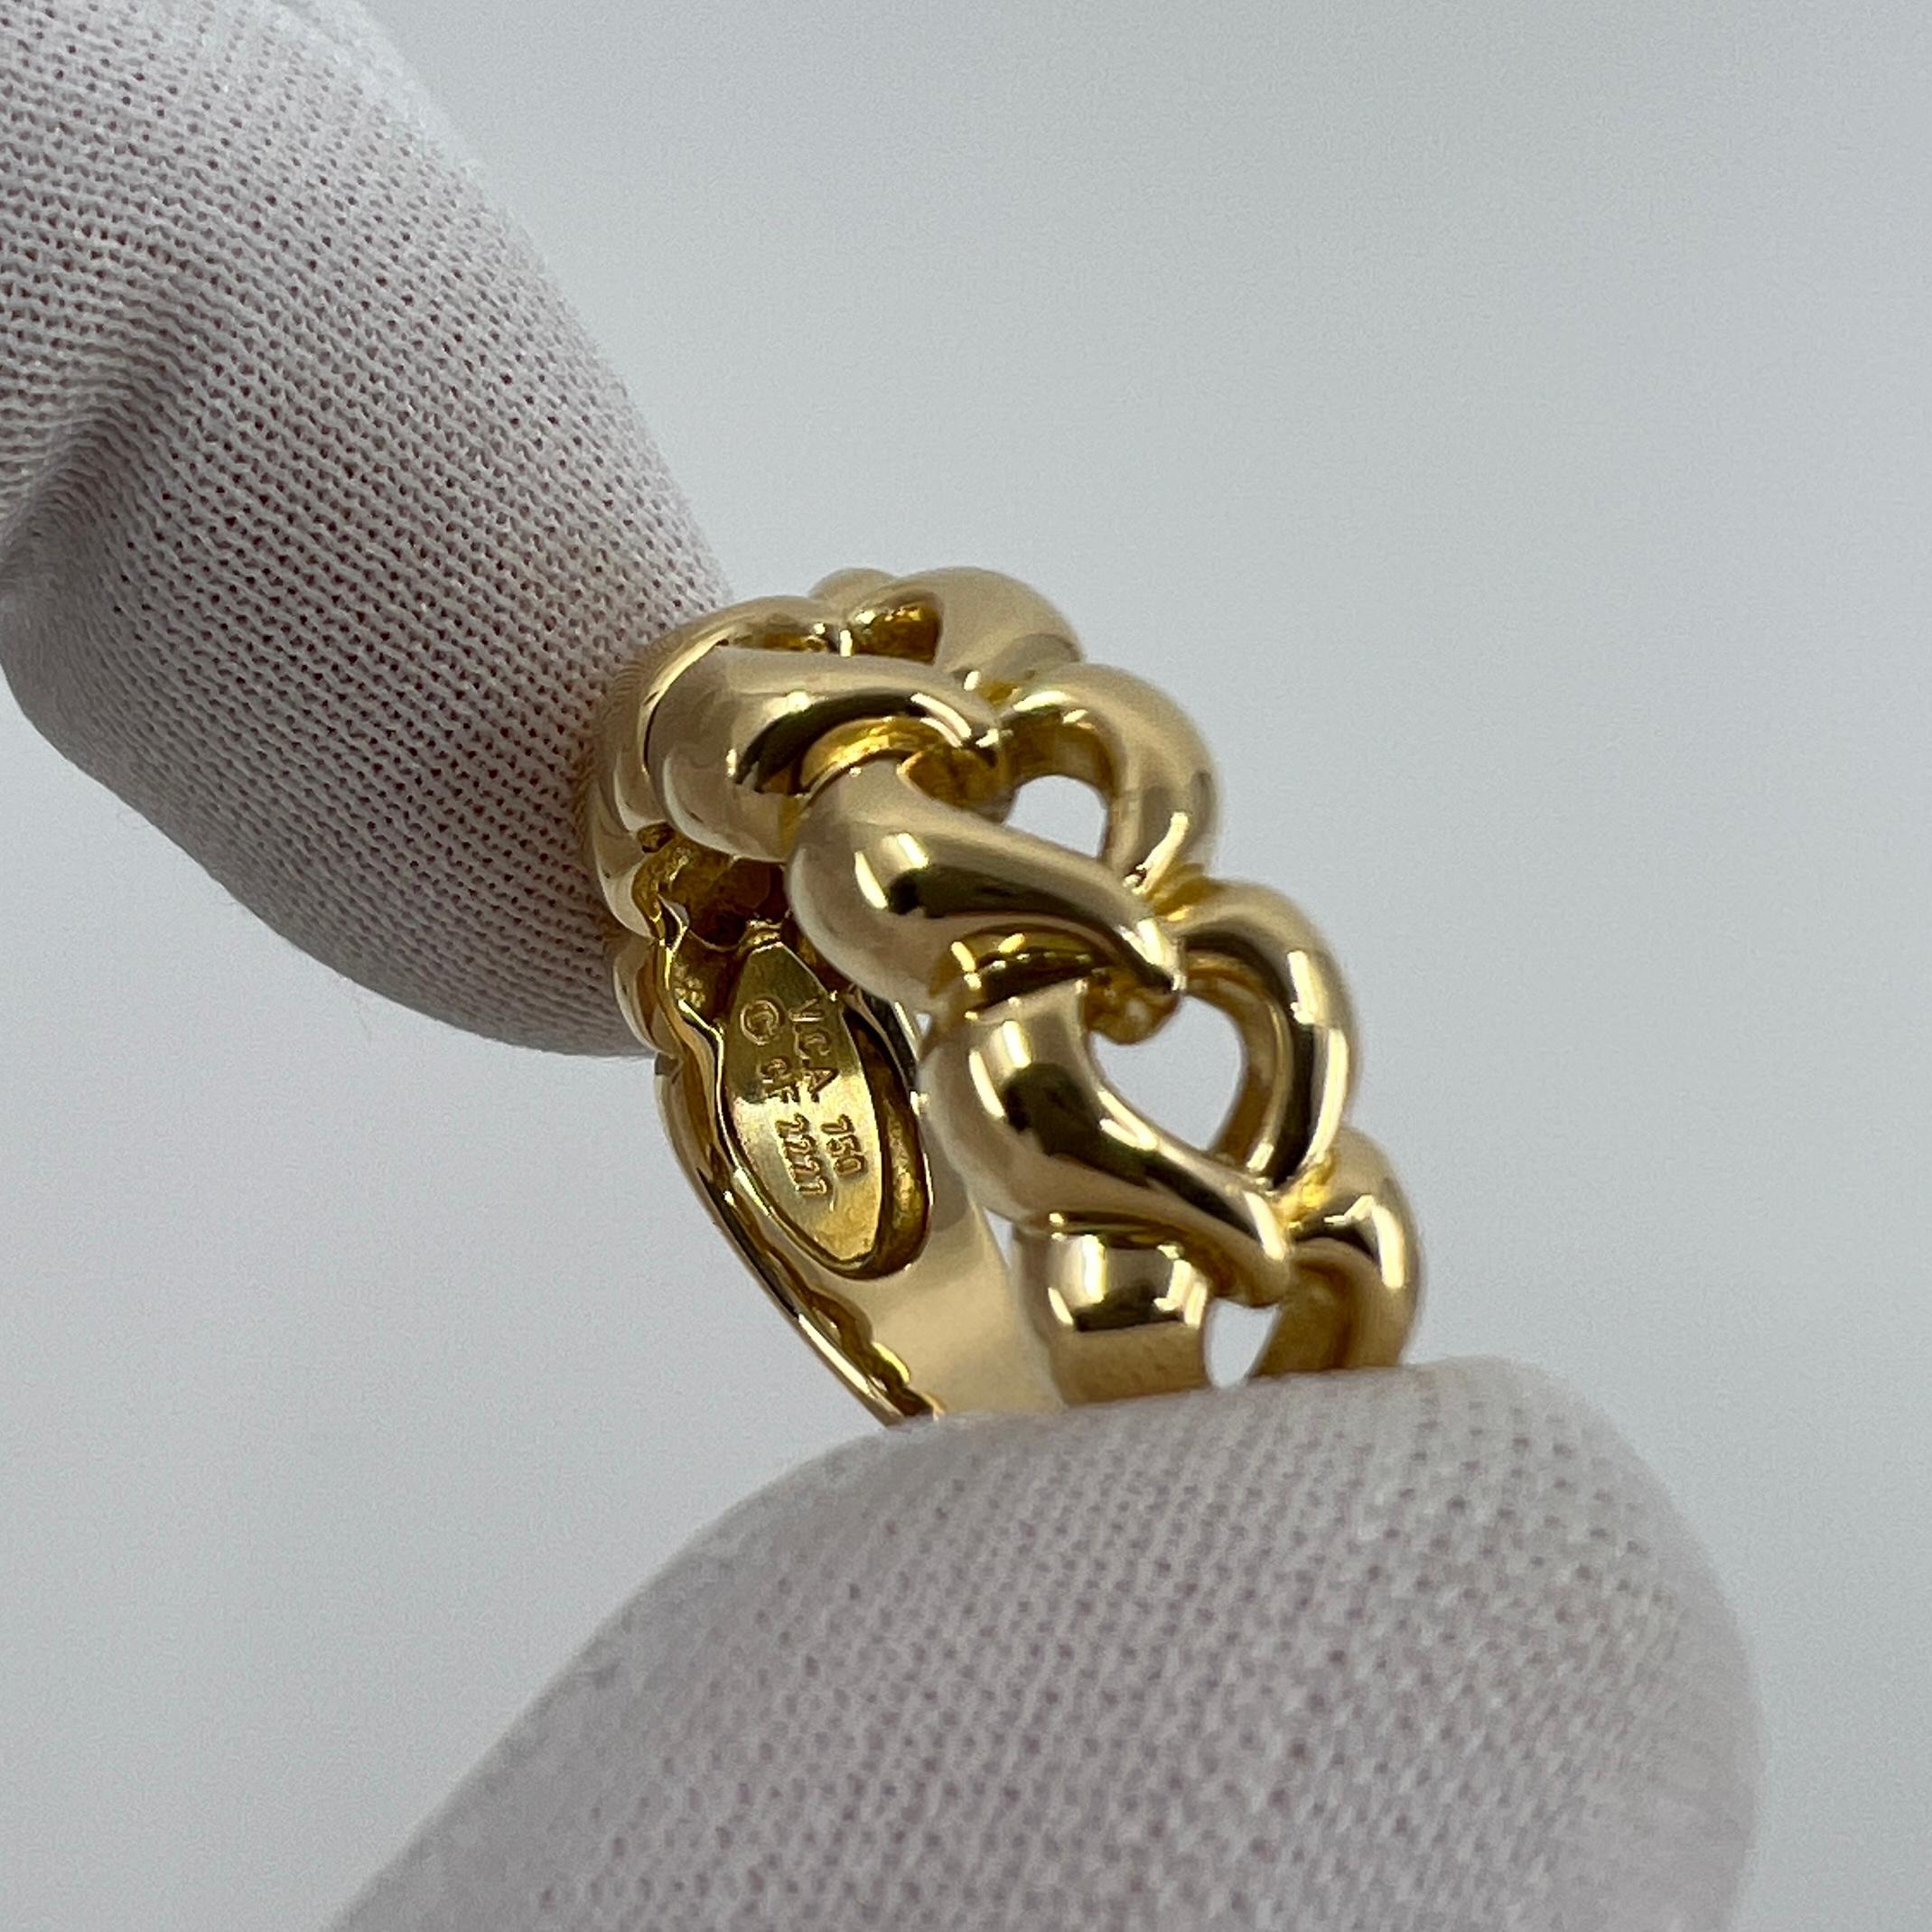 Rare Vintage Van Cleef & Arpels 18k Yellow Gold Open Heart Band Ring with Box 1